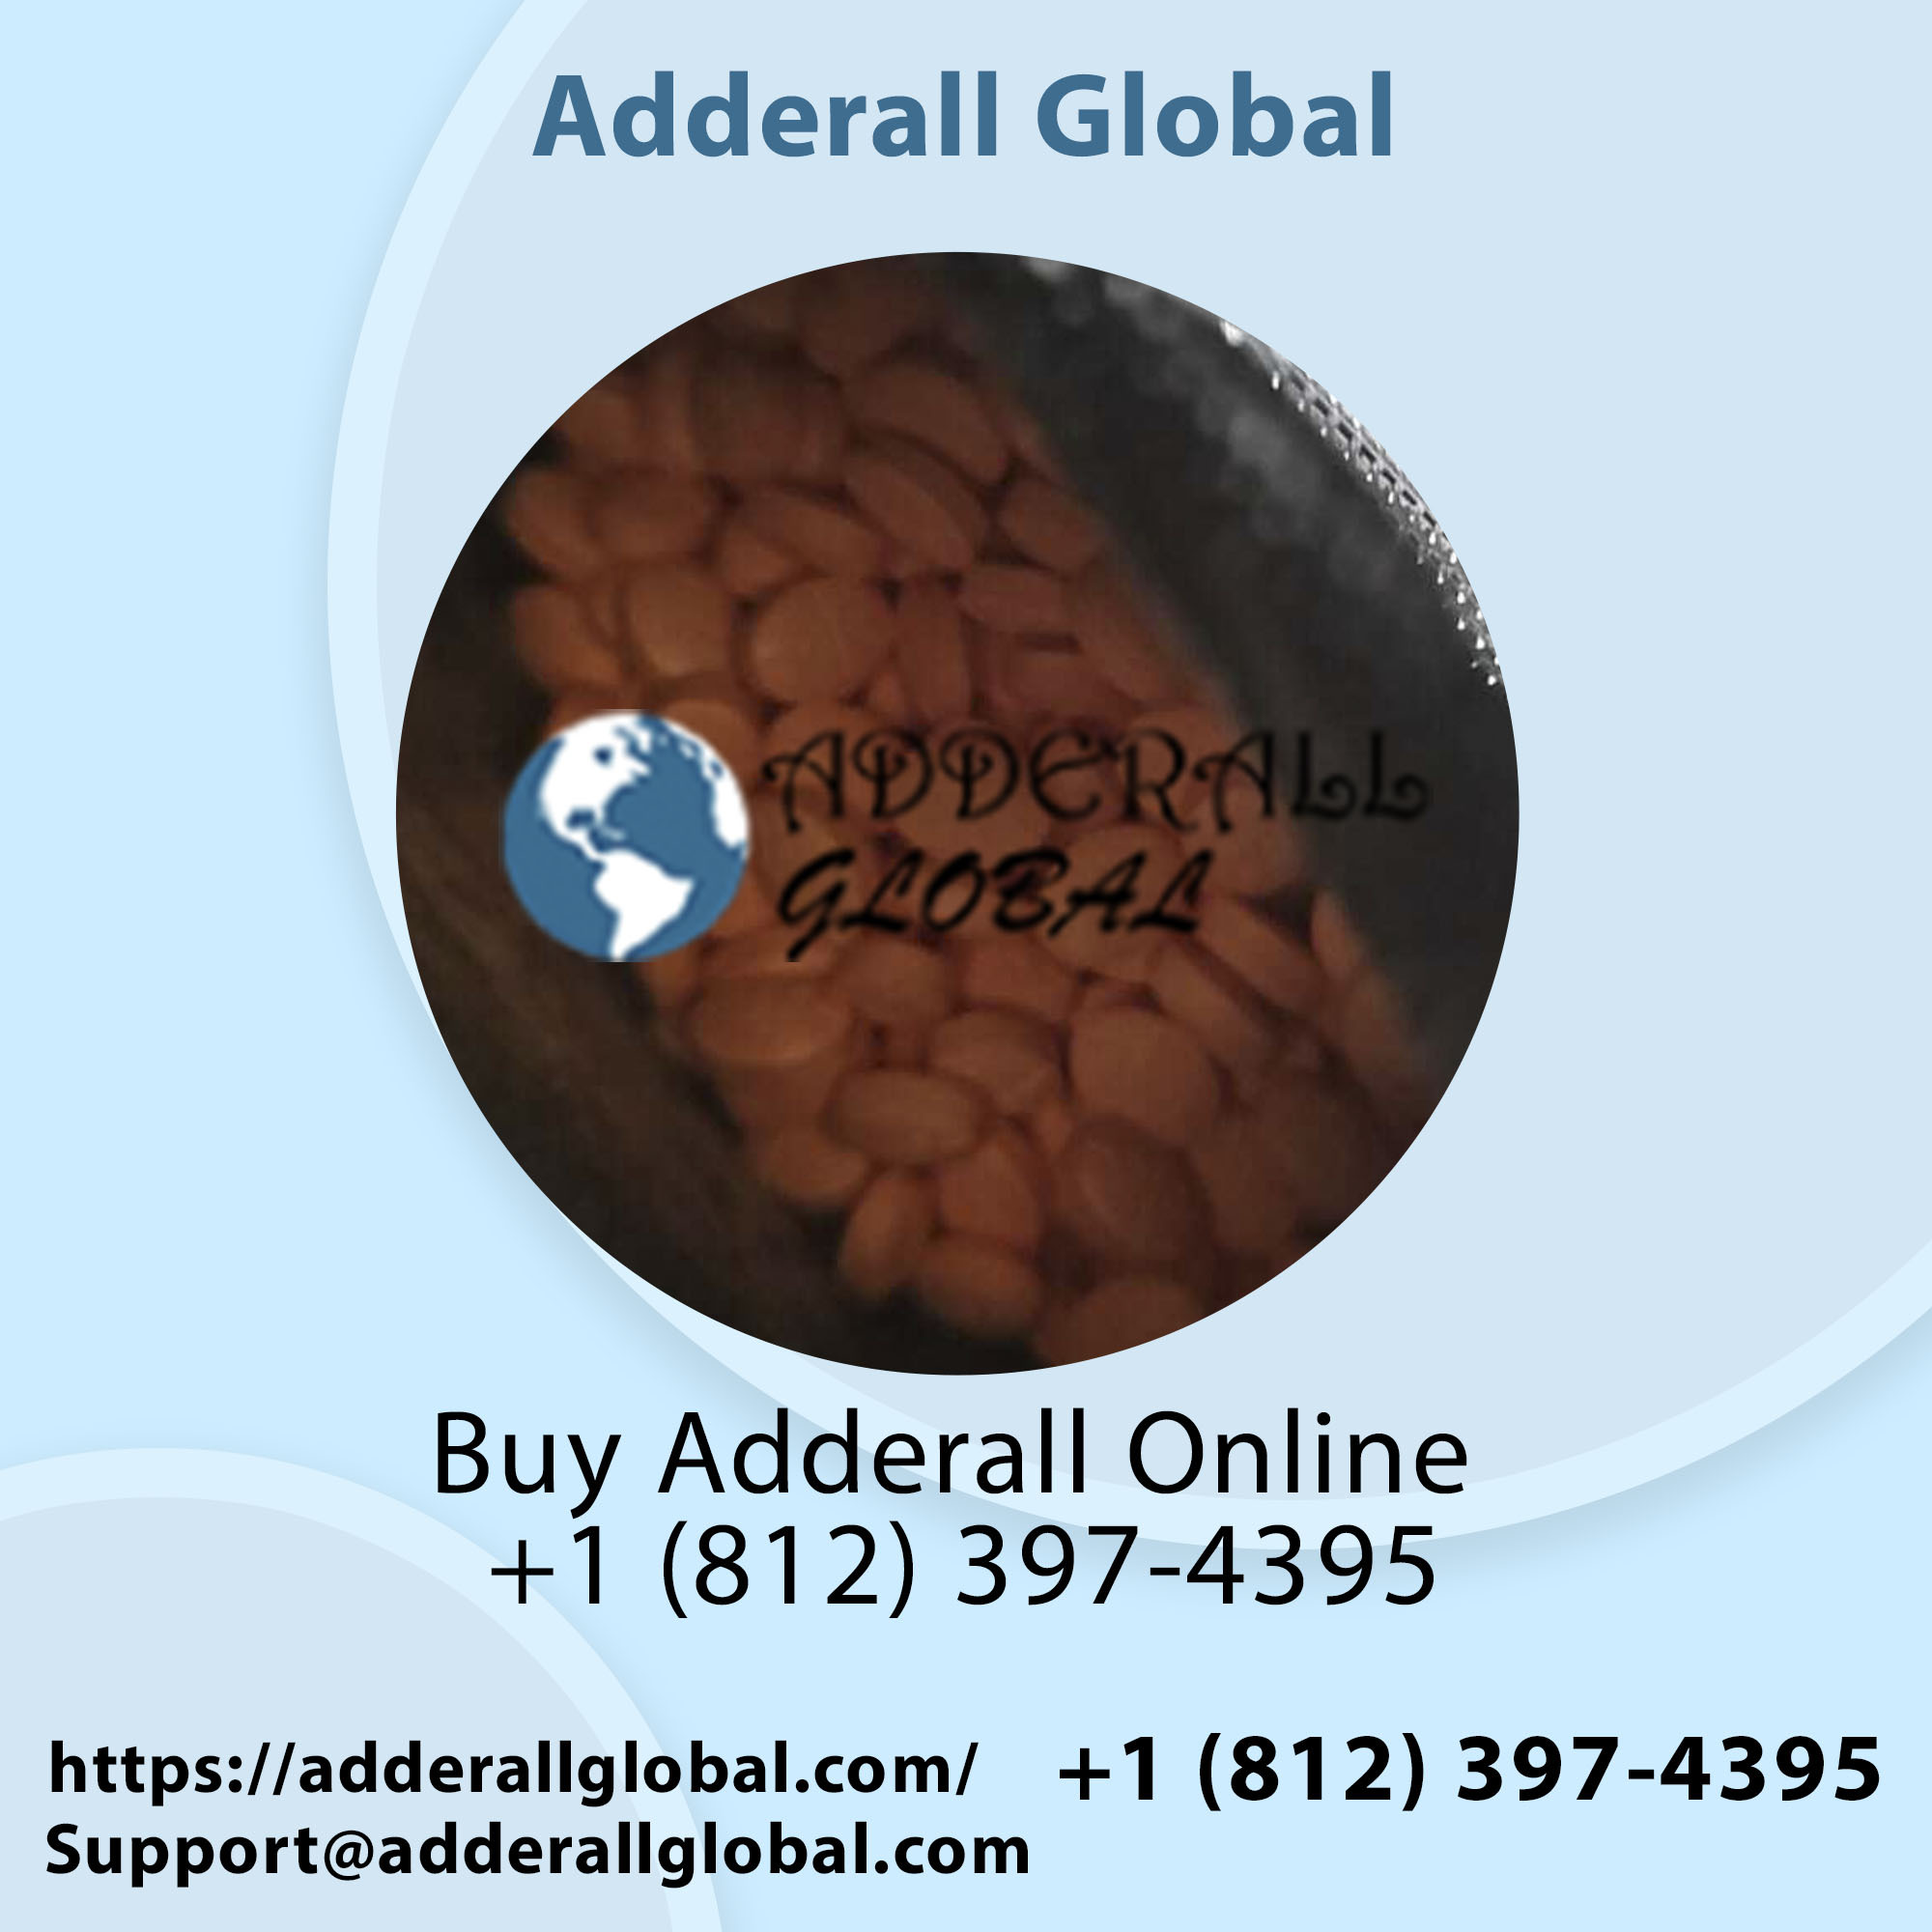 Buy Adderall Online Without Prescription: The Risks and Safe Alternatives